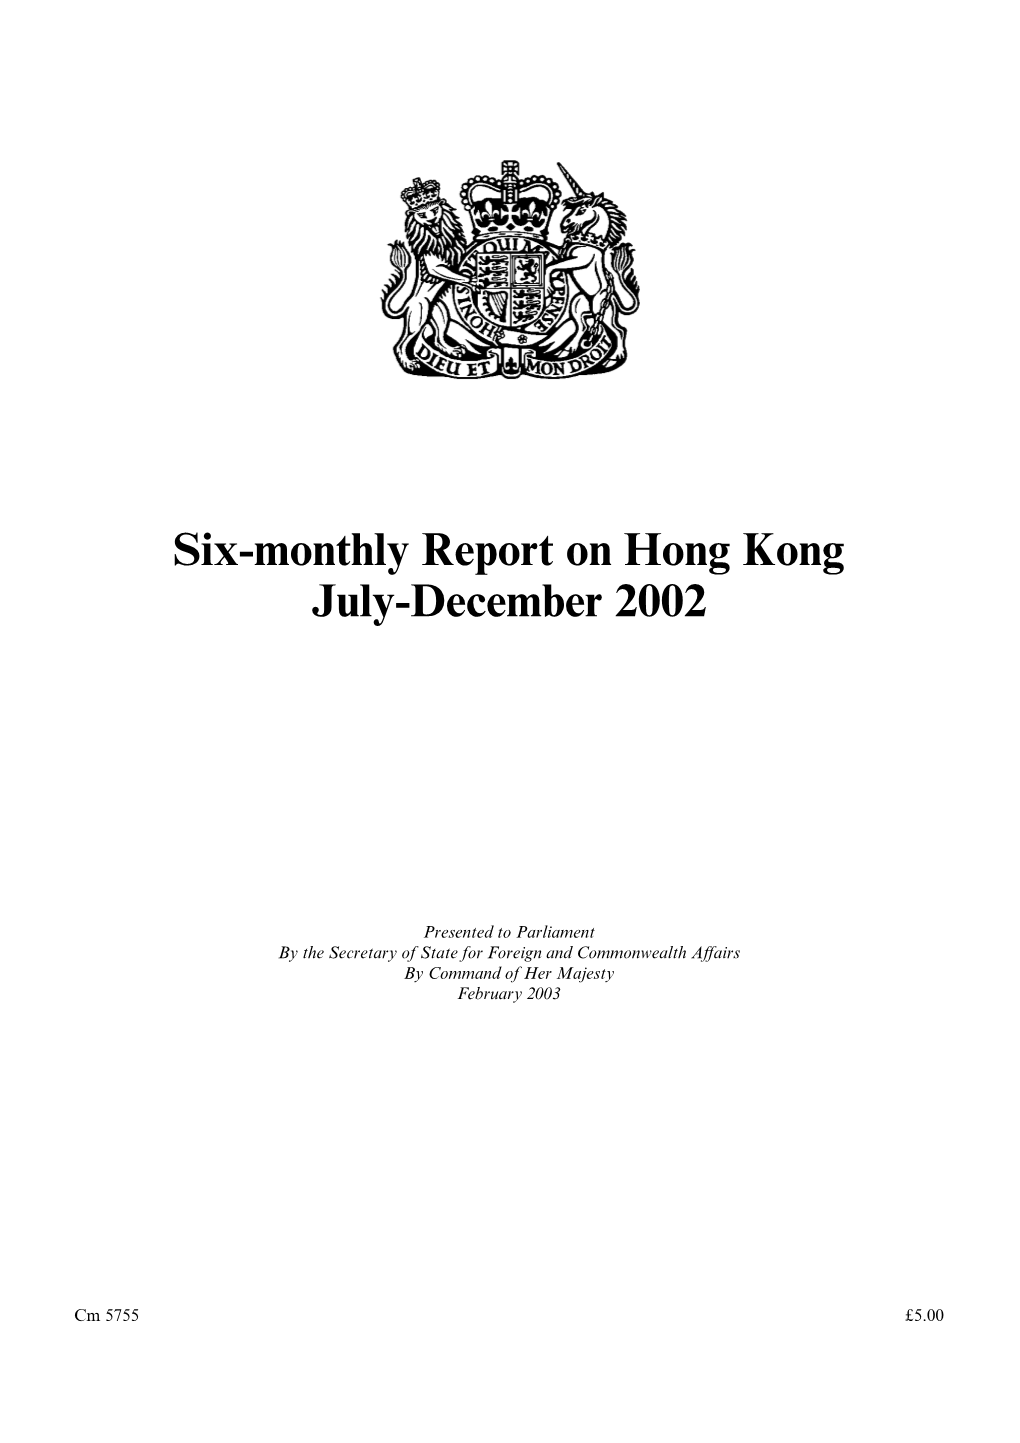 Six-Monthly Report on Hong Kong July-December 2002